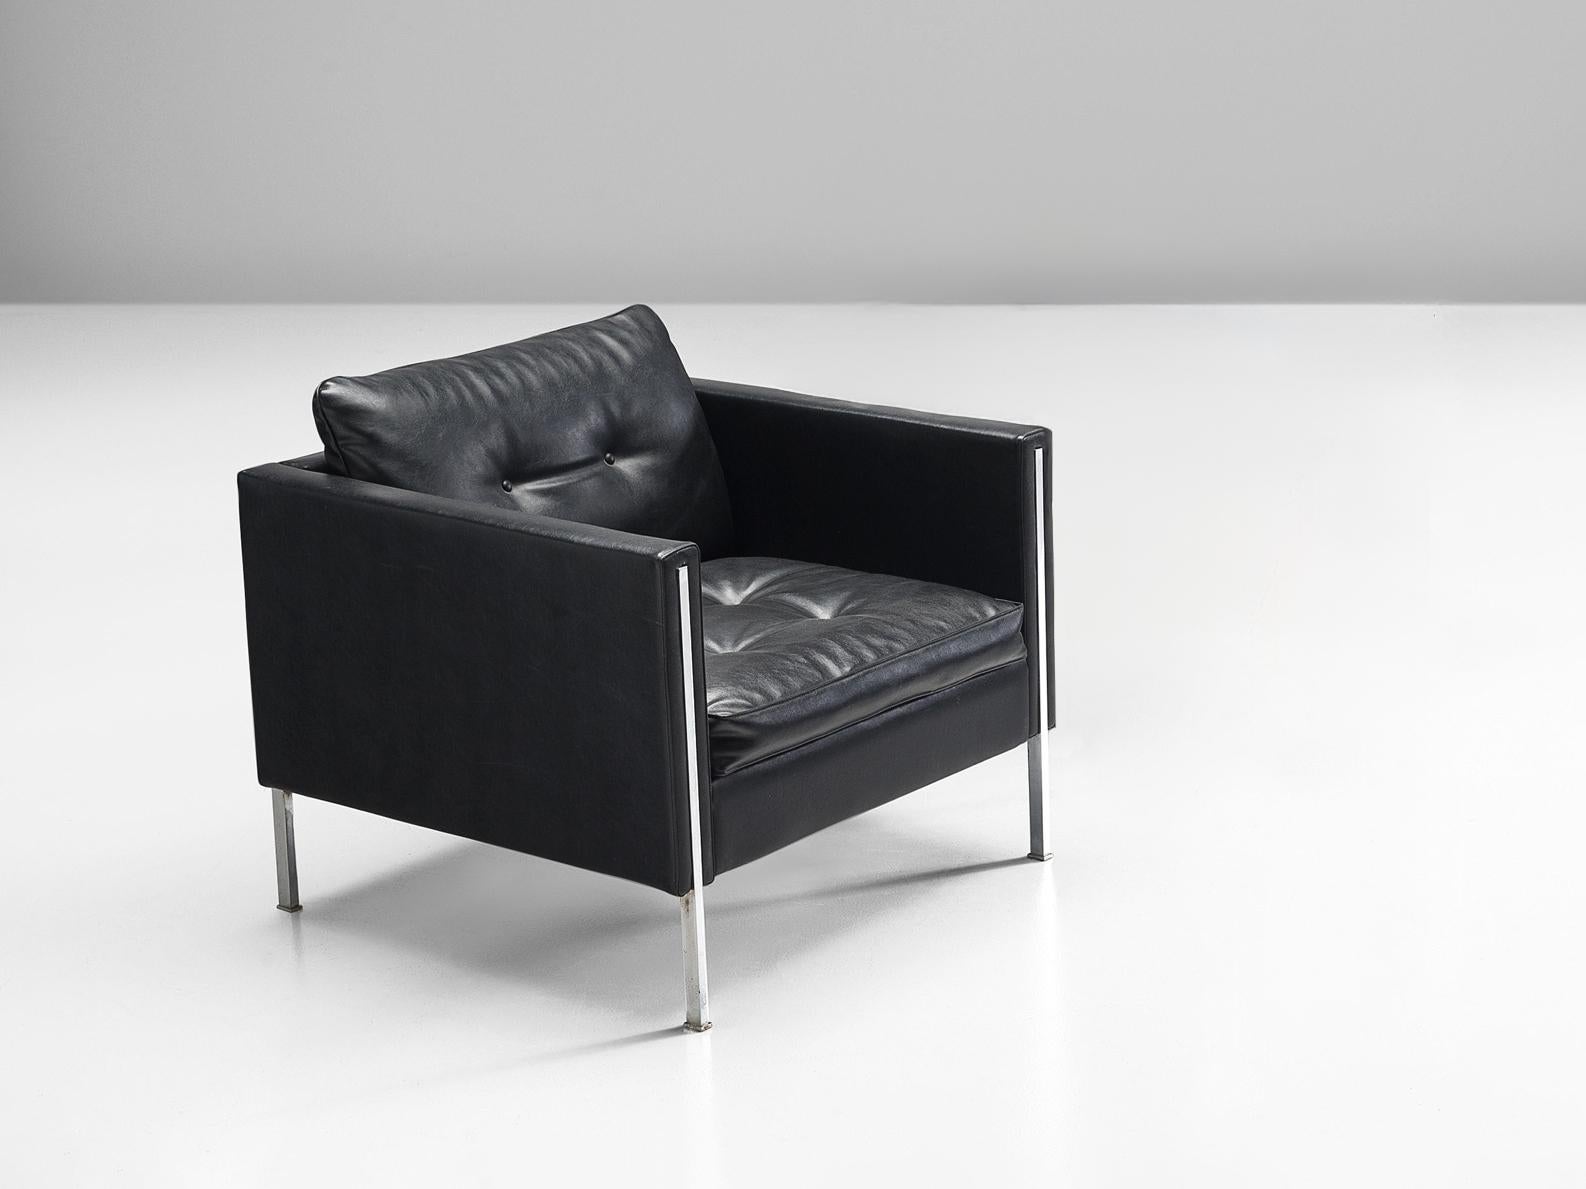 Pierre Paulin for Artifort, lounge chair, model '442/3', leather, steel, The Netherlands 1962.

A design by Pierre Paulin that radiates a modern minimalist look featuring simple geometry and clear contours. The combination of the materials enhances